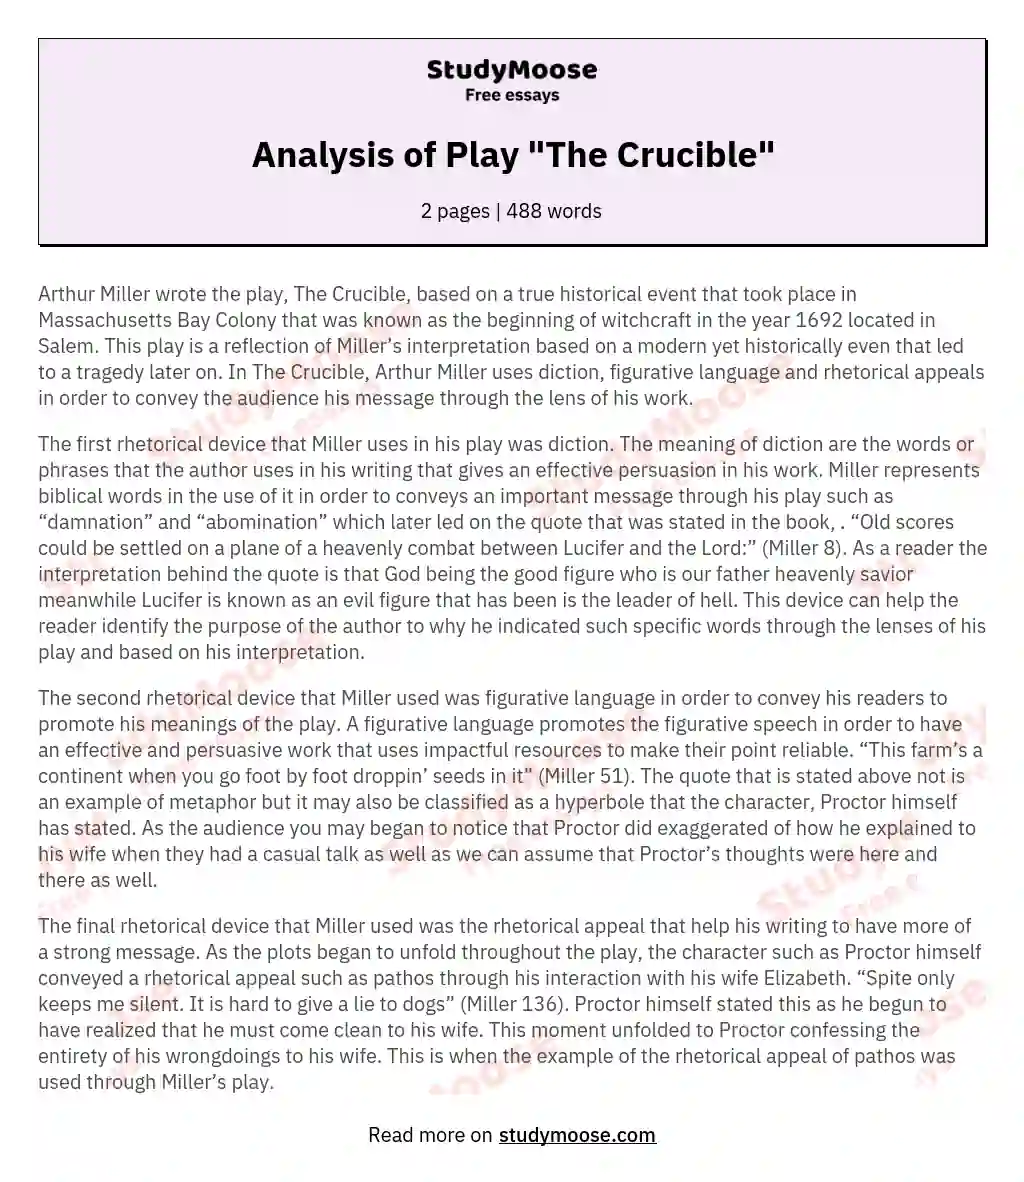 Analysis of Play "The Crucible"